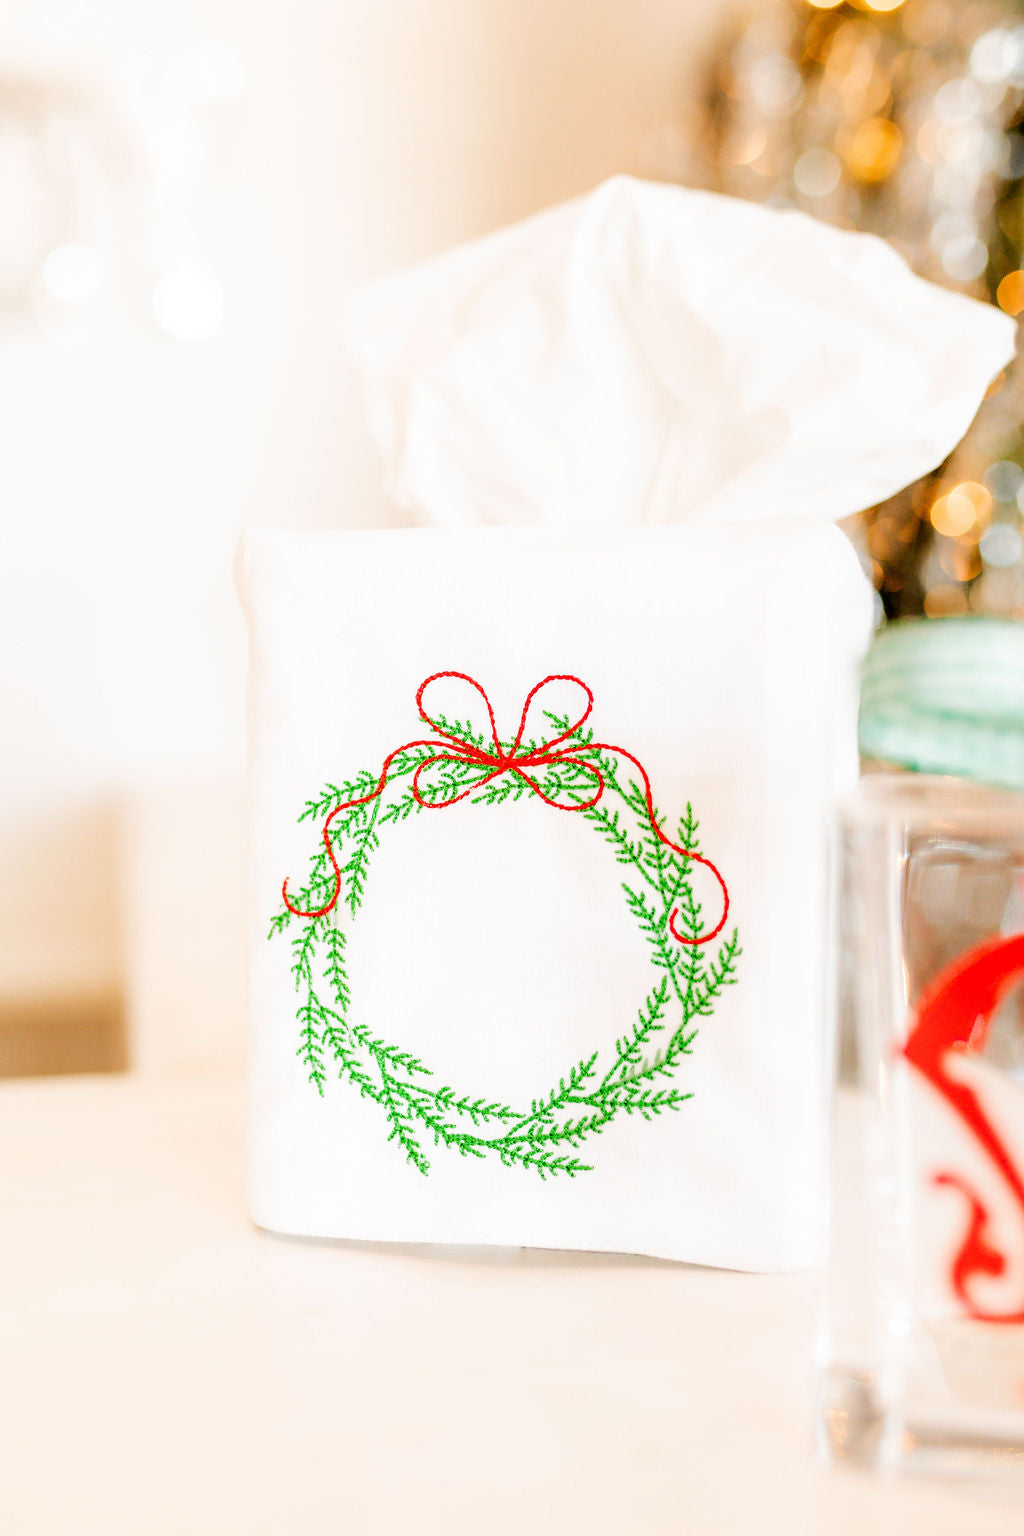 Christmas Wreath Embroidered Tissue Box Cover